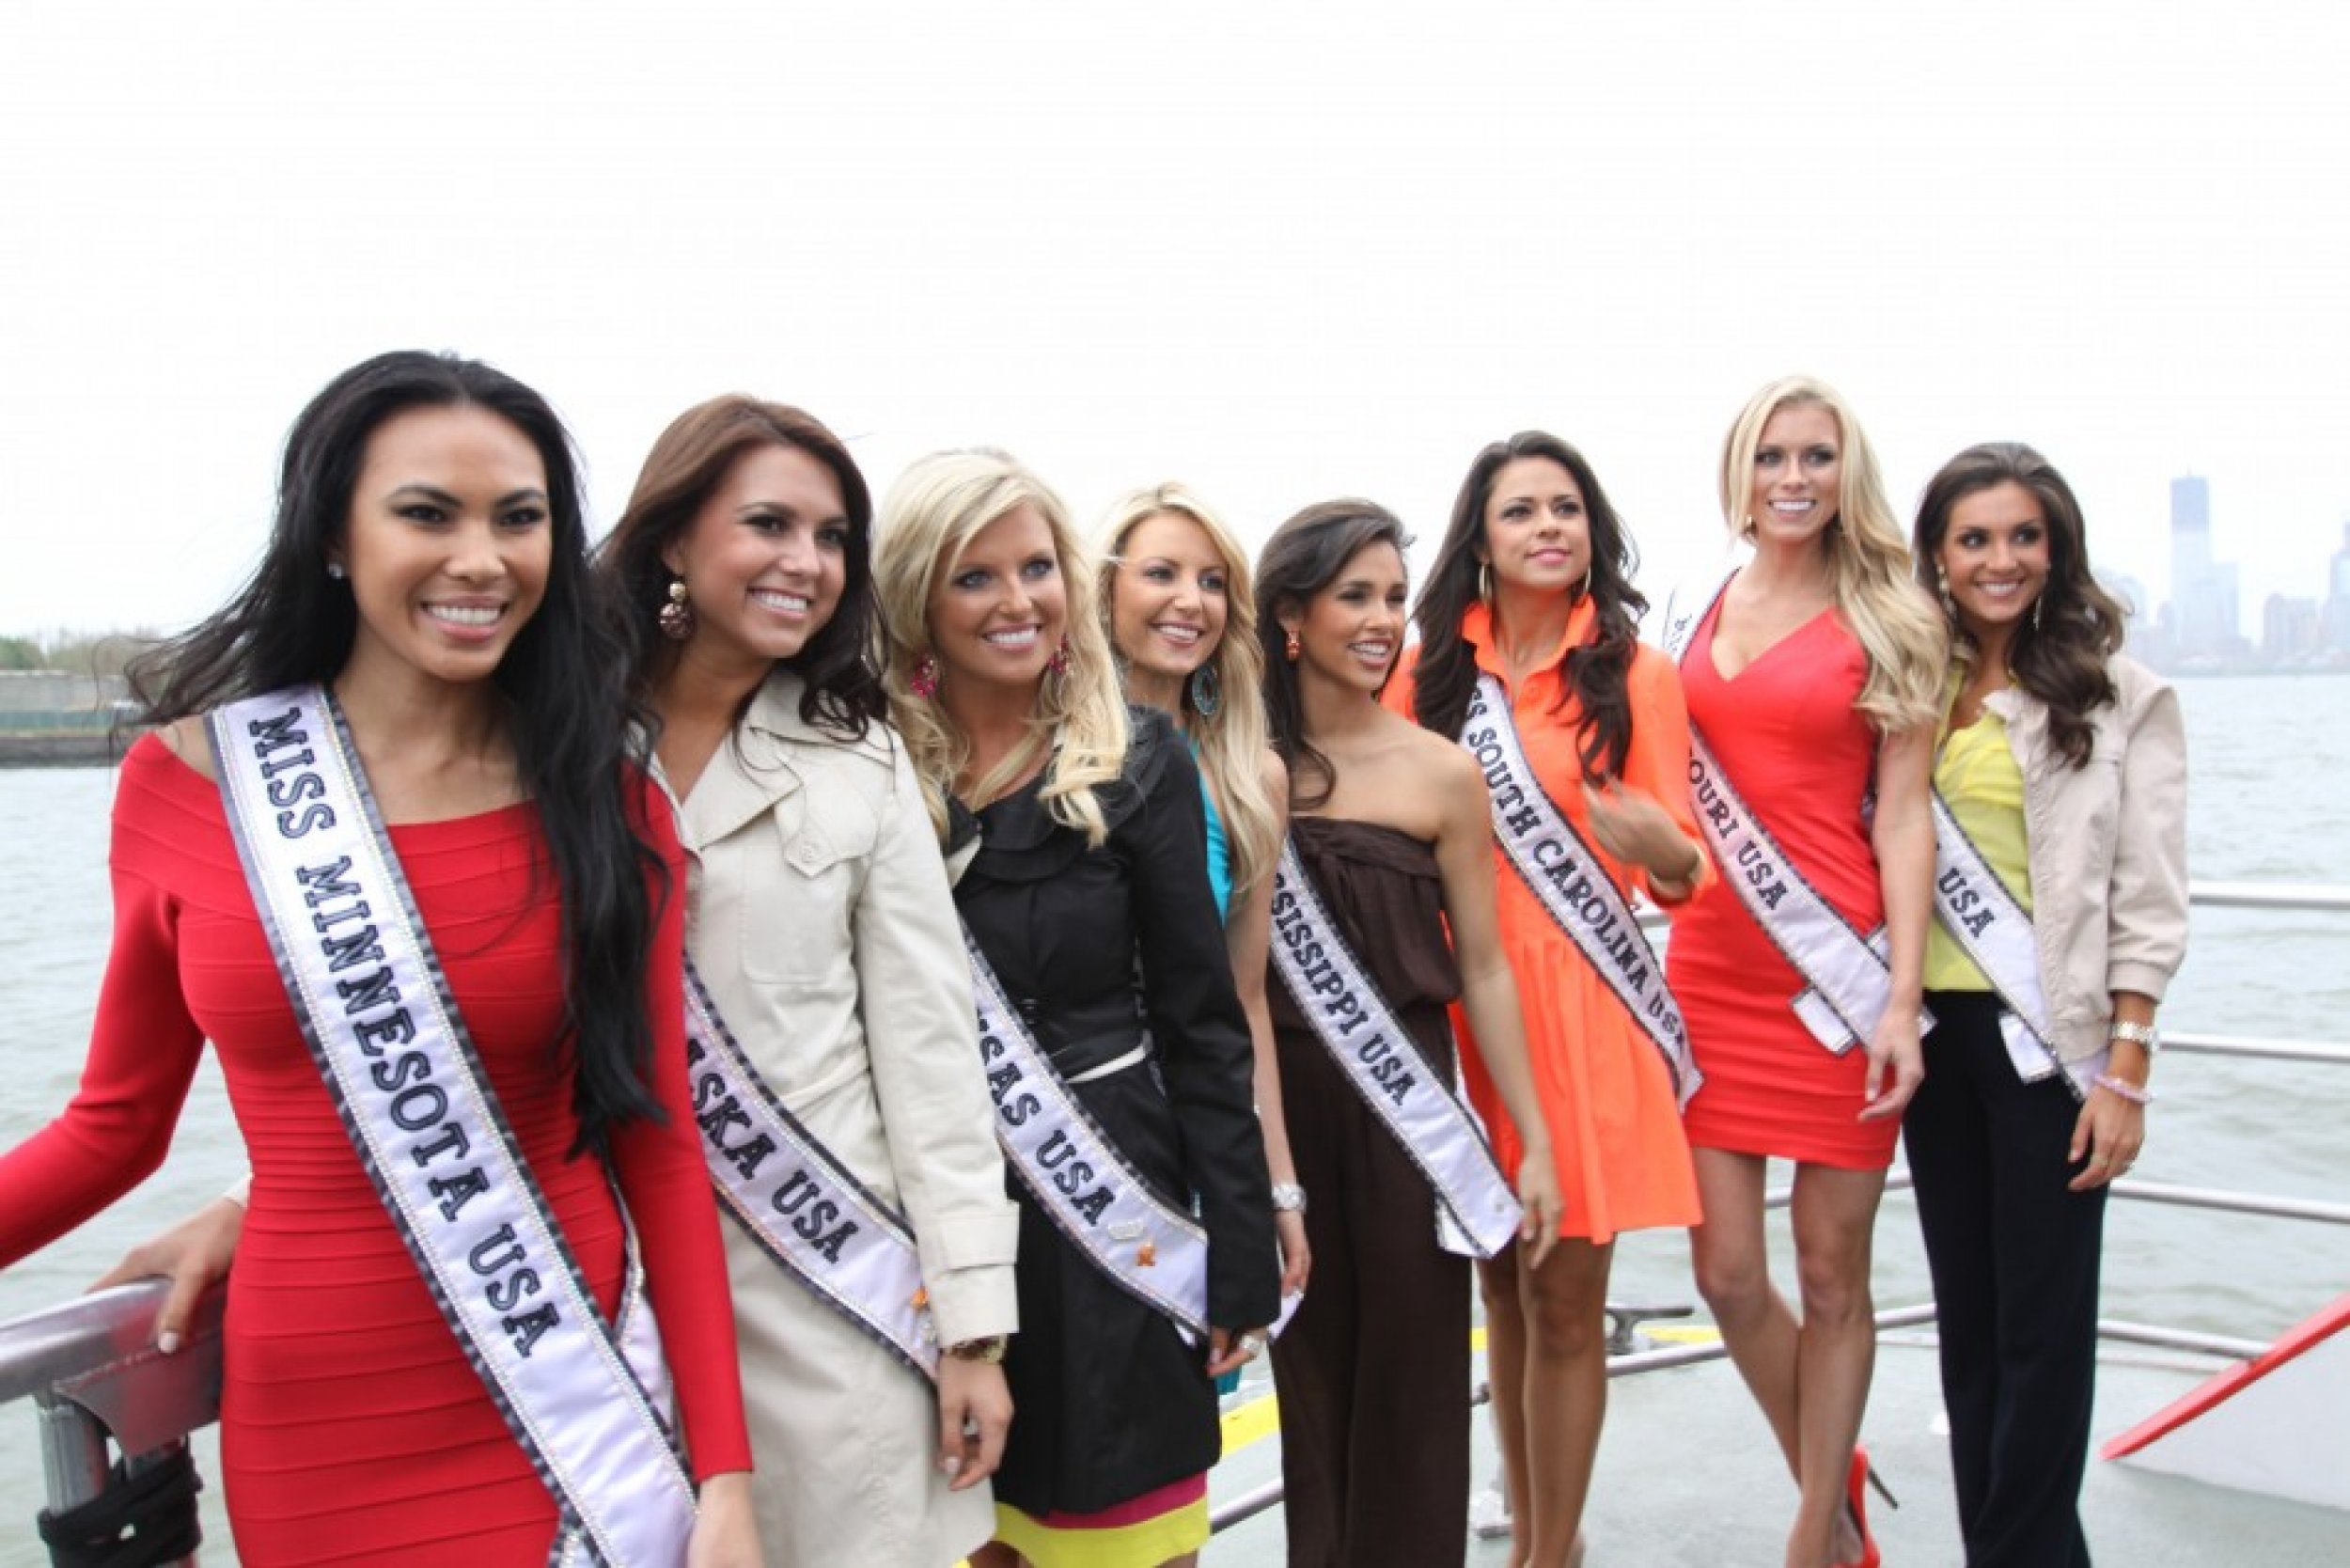 Several Miss USA candidates pose for a picture at the cruise ship039s stern